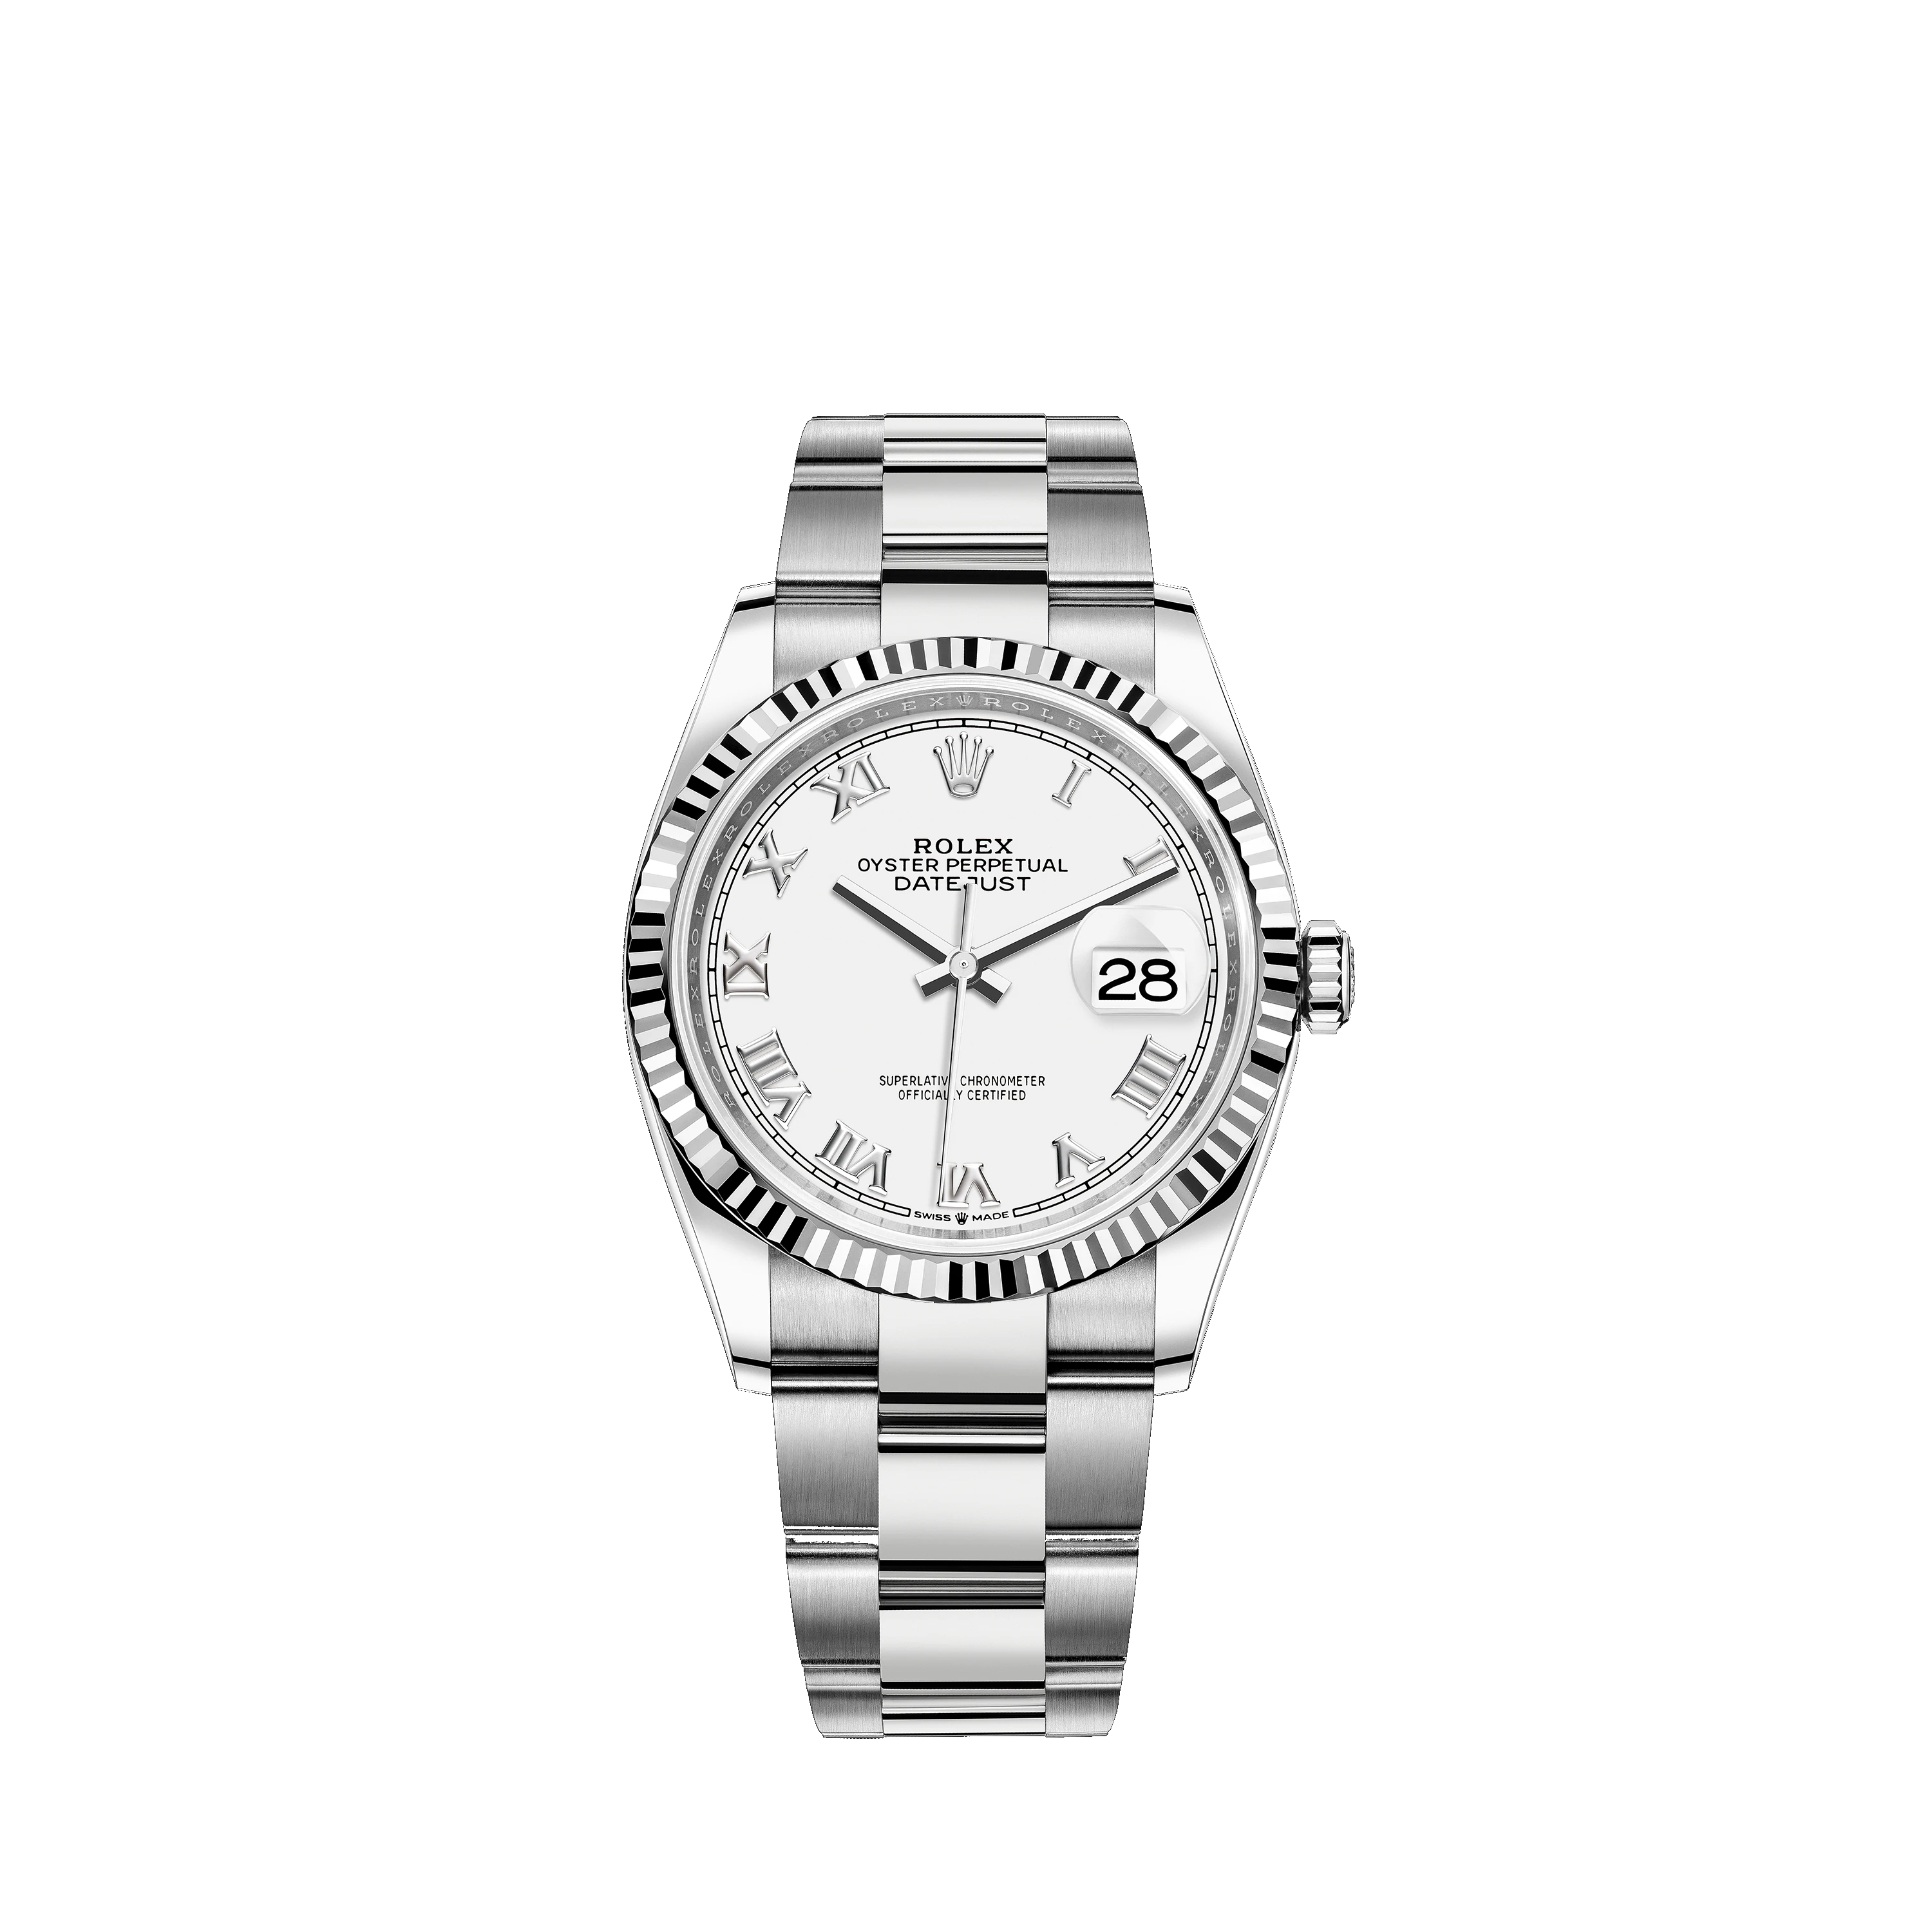 Datejust 36 126234 White Gold & Stainless Steel Watch (White)